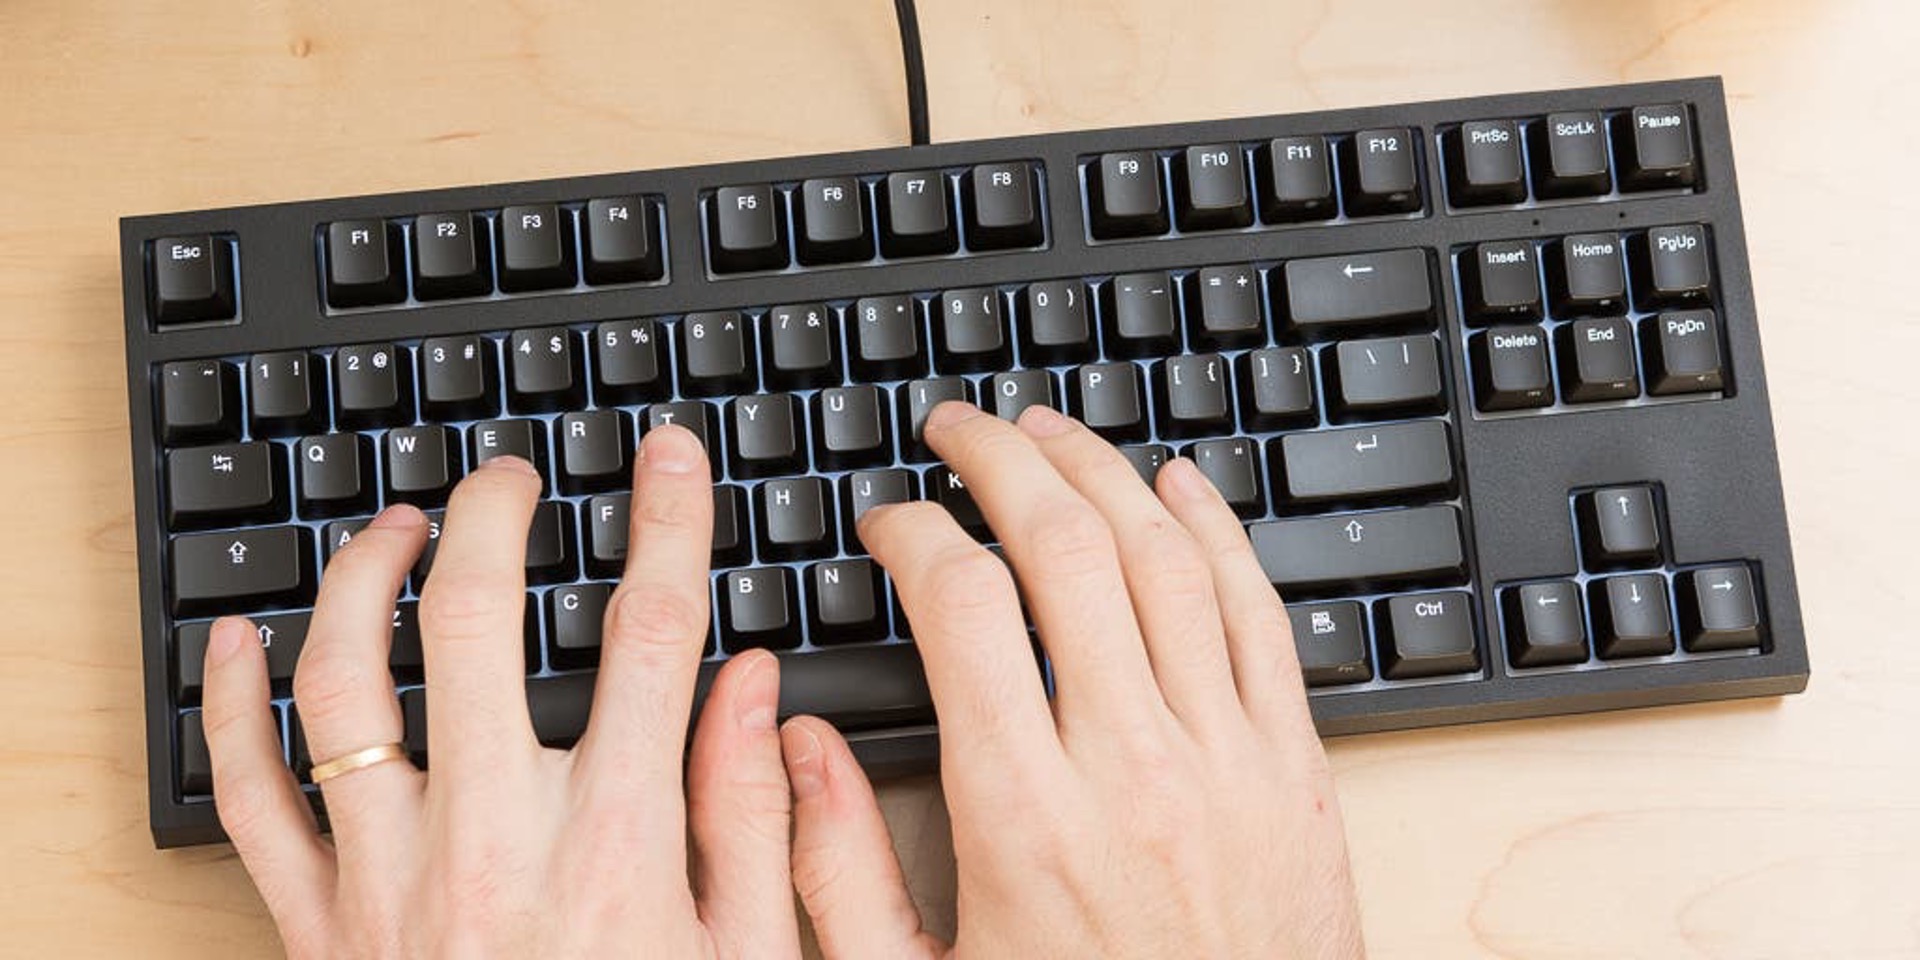 How To Prevent Carpal Tunnel With A Gaming Keyboard